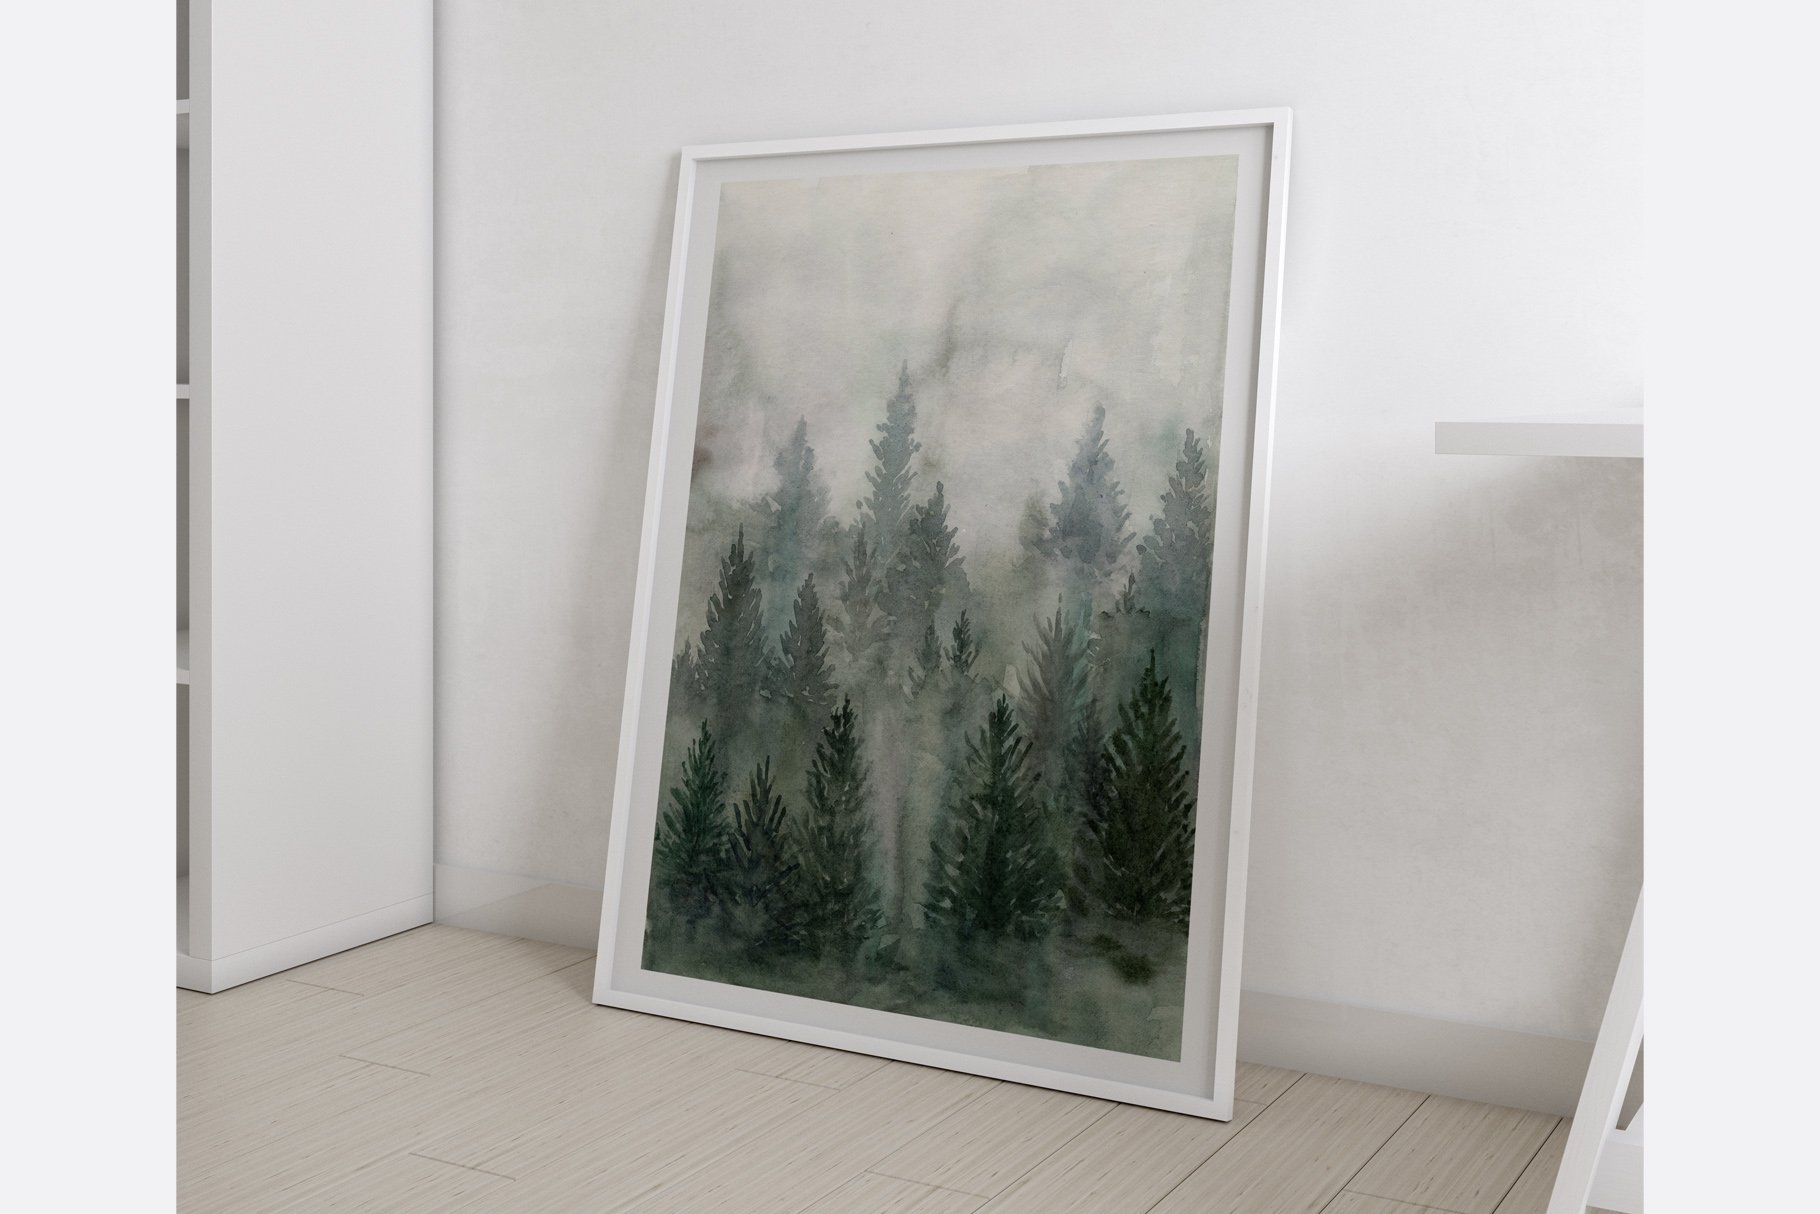 Painting of a forest in a white frame.